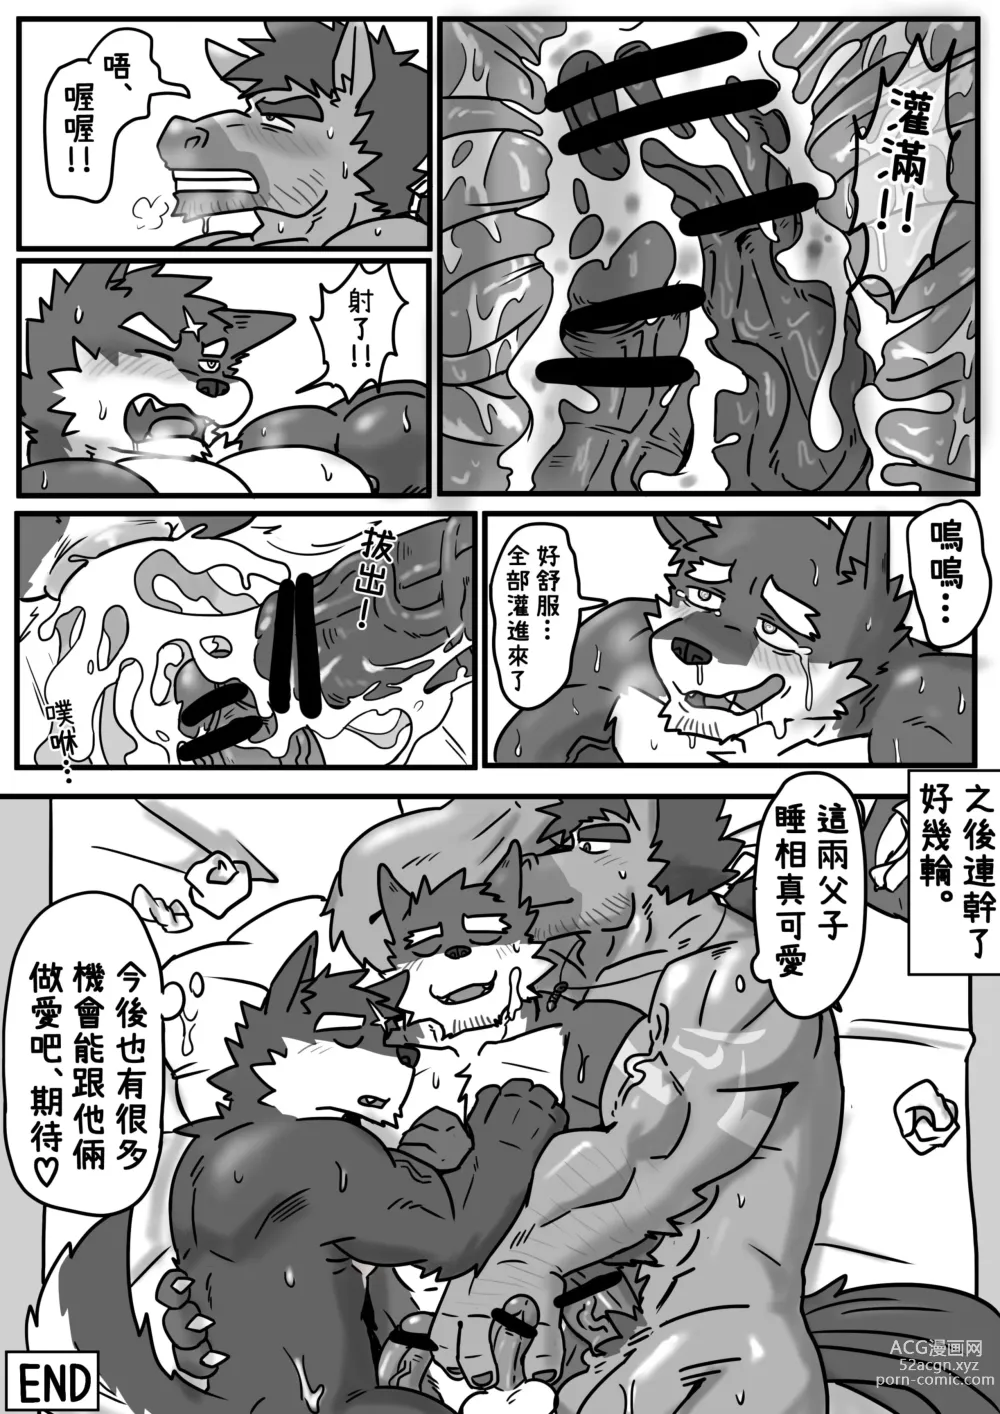 Page 9 of doujinshi Horse and Wolf Father and Son